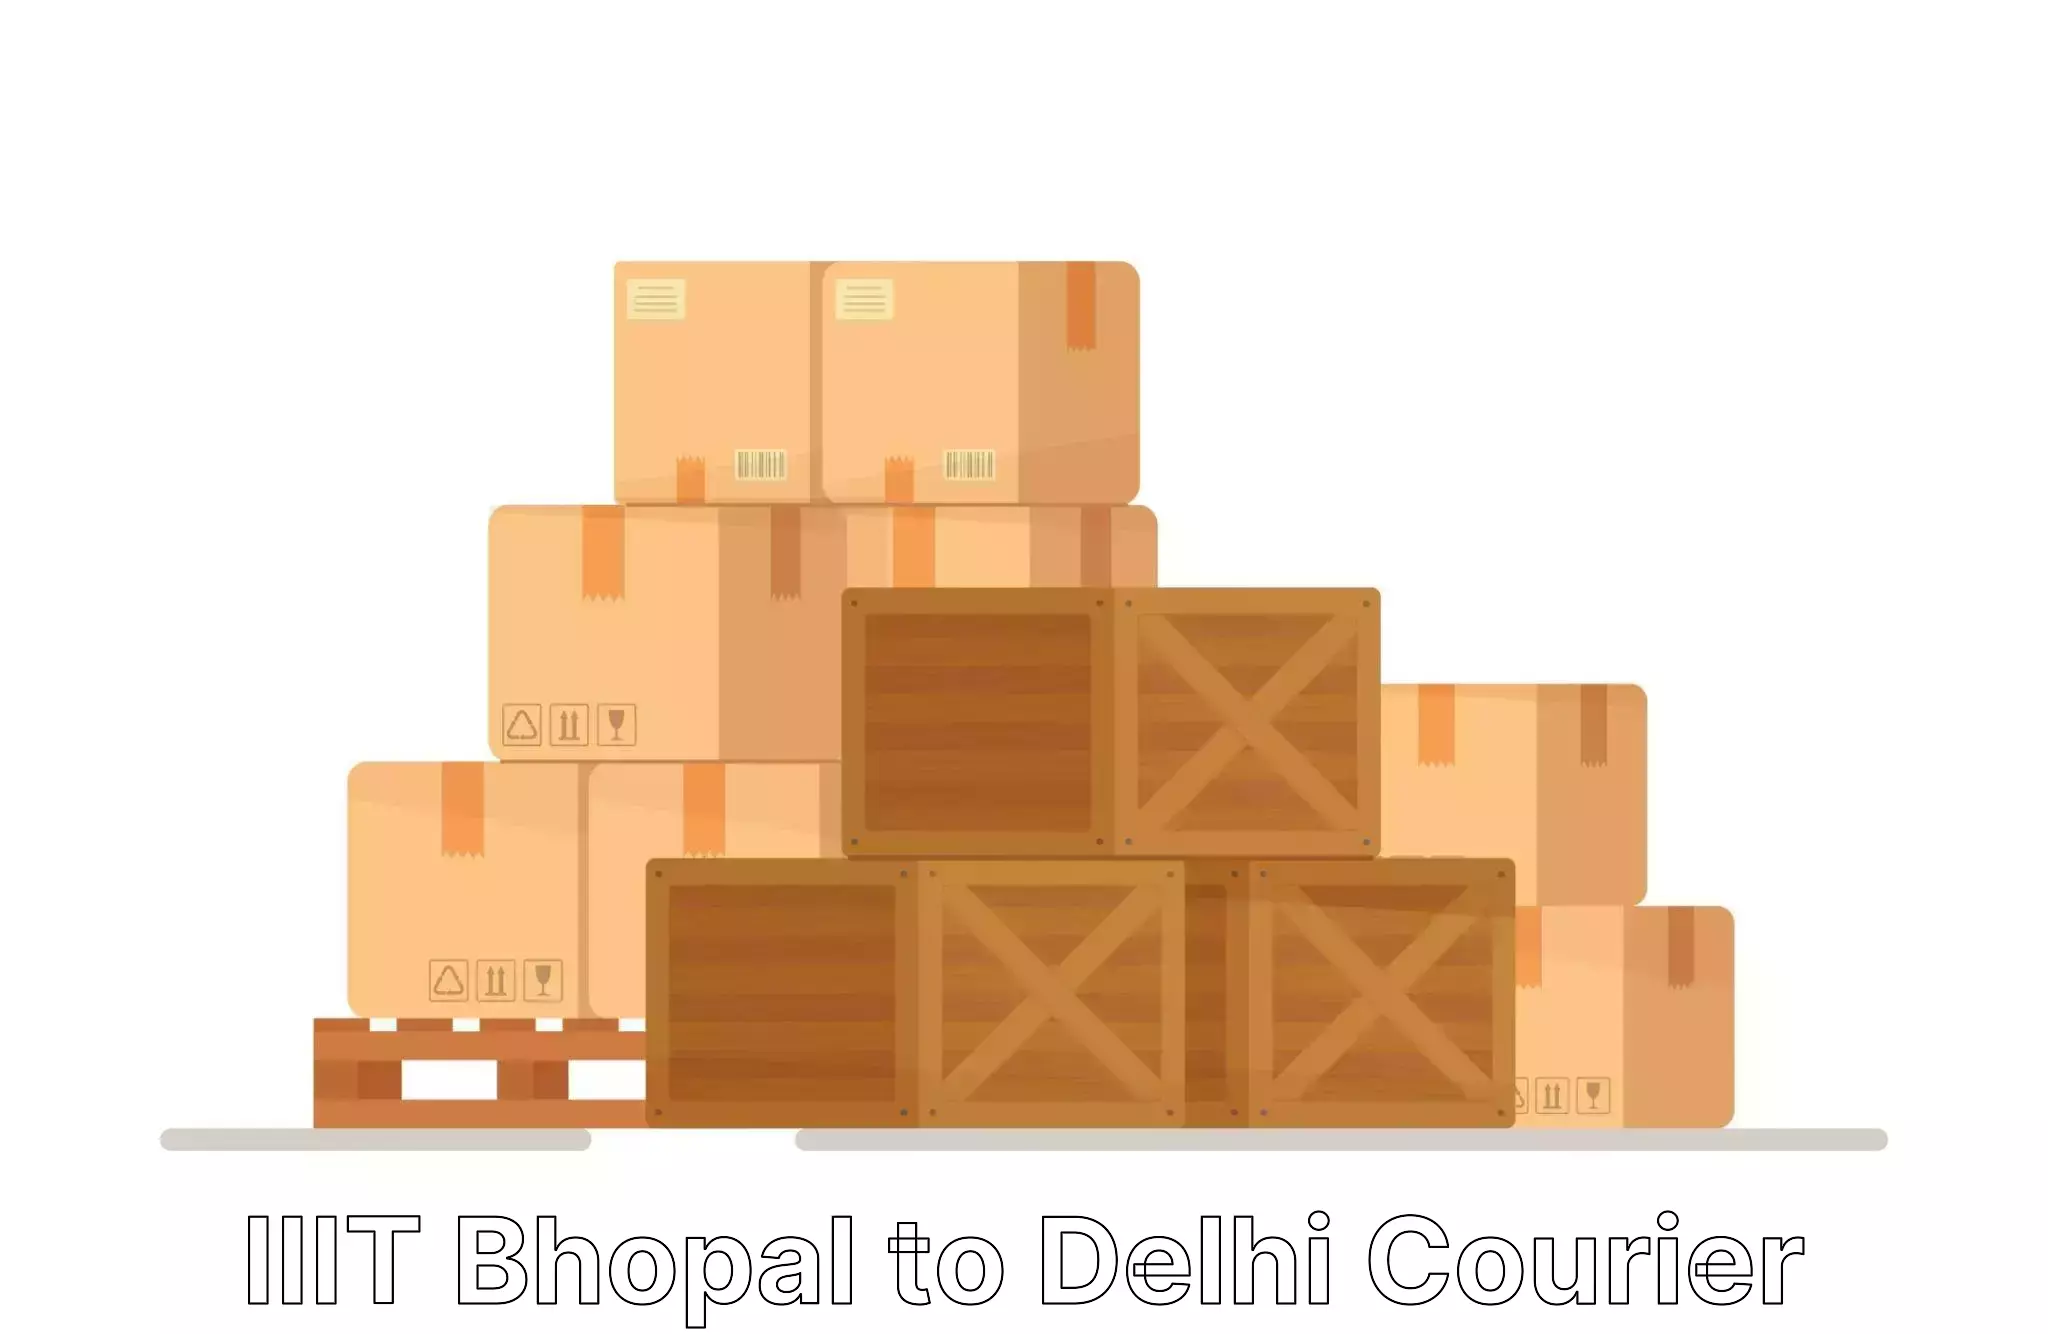 Household goods transport service IIIT Bhopal to NCR